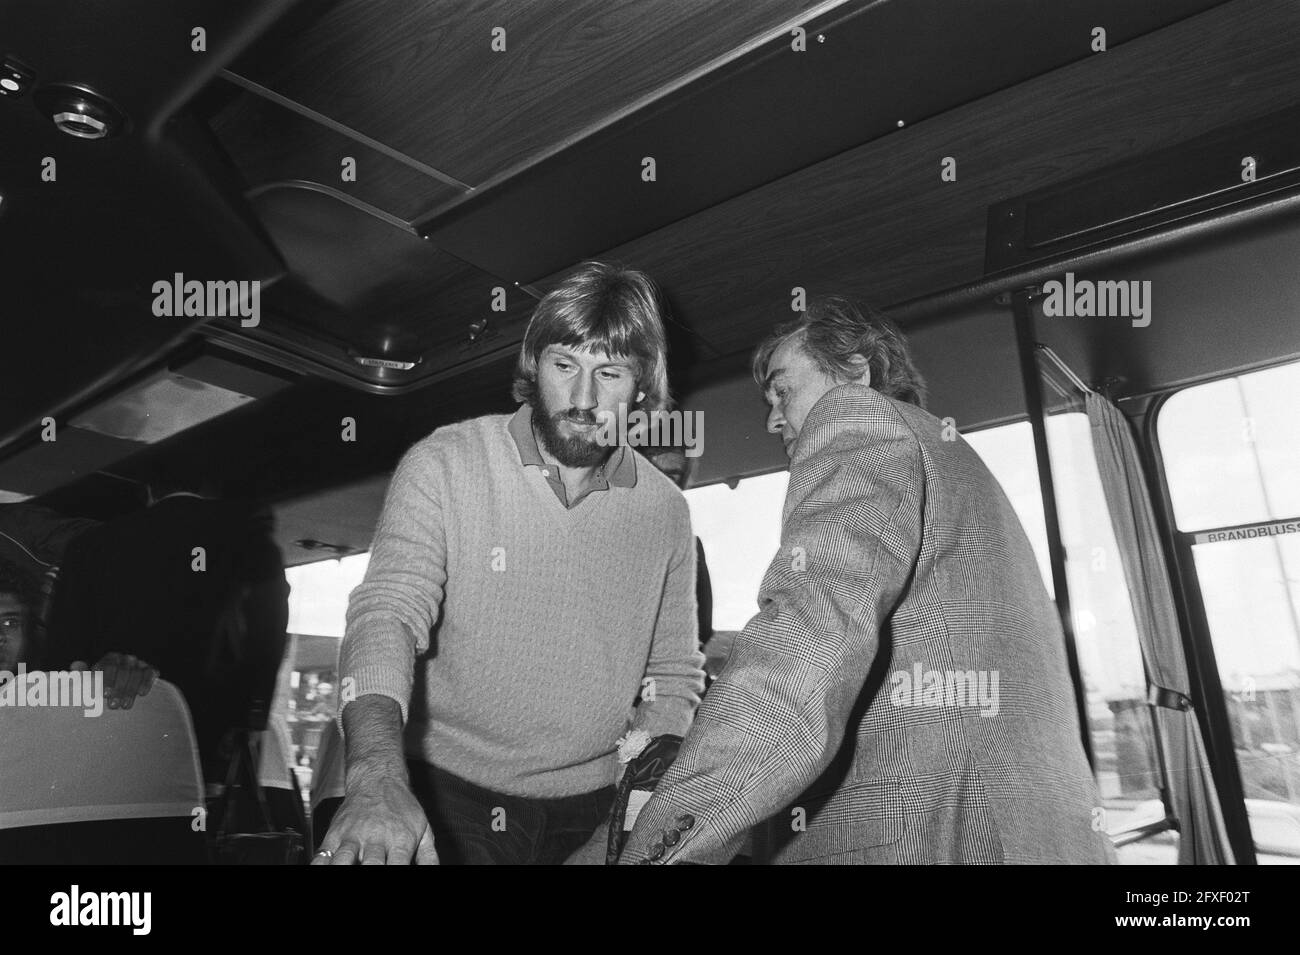 Trainer Ernst Happel with (left) Manfred Kaltz, September 29, 1981, trainers, soccer players, The Netherlands, 20th century press agency photo, news to remember, documentary, historic photography 1945-1990, visual stories, human history of the Twentieth Century, capturing moments in time Stock Photo